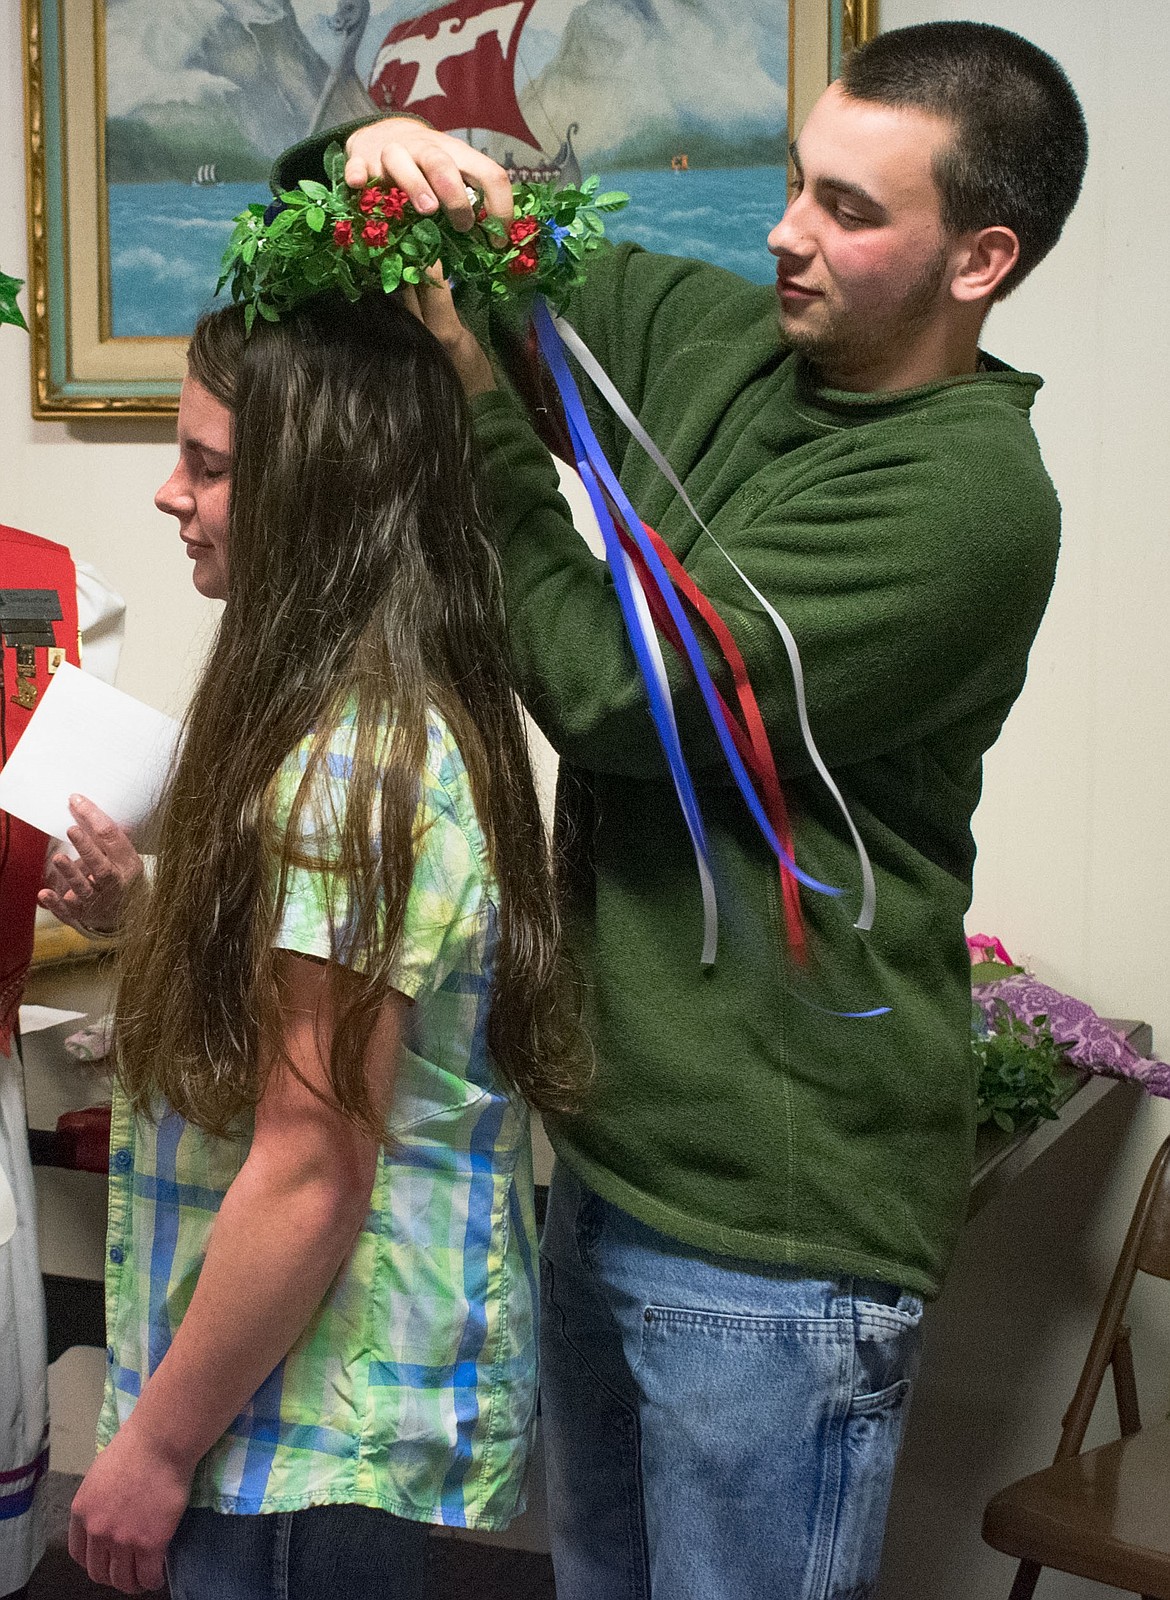 Caleb Thomas, former Nordicfest royalty himself, had a little trouble getting the Nordicfest Princess crown onto his sister, Bethany Thomas, at the annual crowning of the Libby Nordicfest Heritage Festival royalty, April 14. (Ben Kibbey/The Western News)